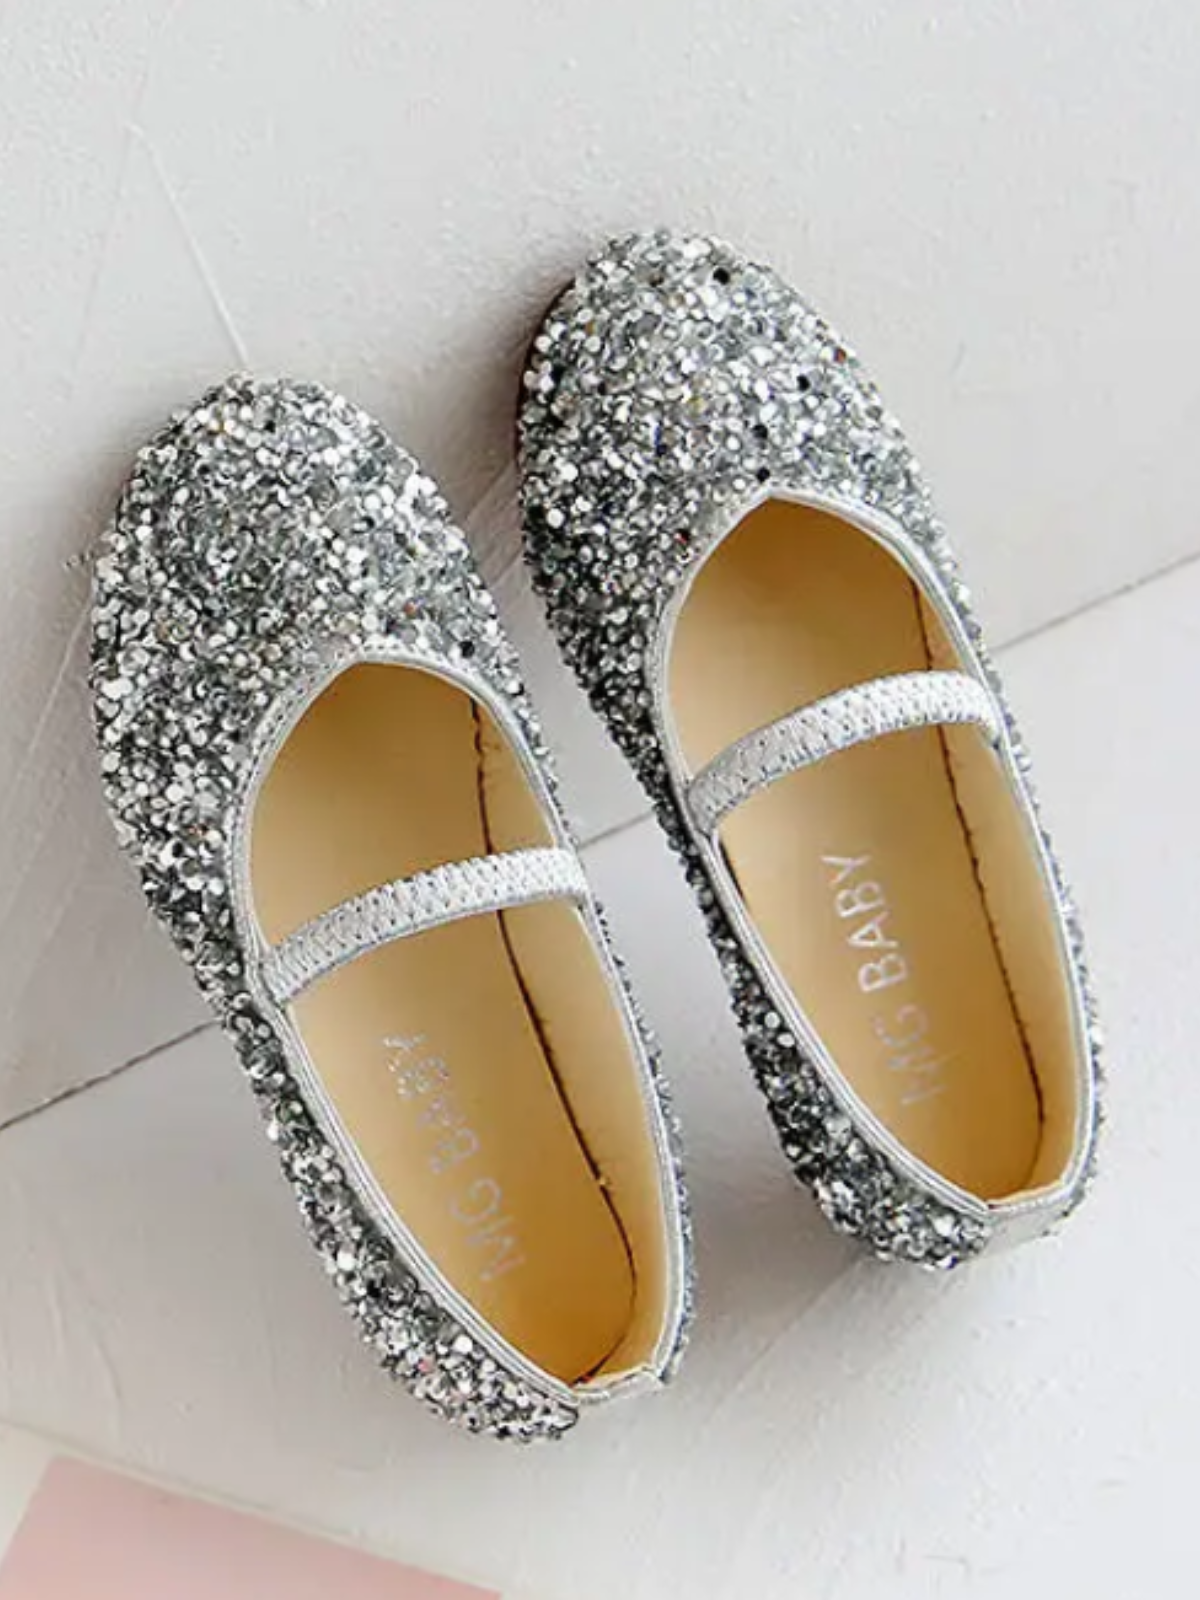 She Shines Brightly Sequin Mary Jane Shoes